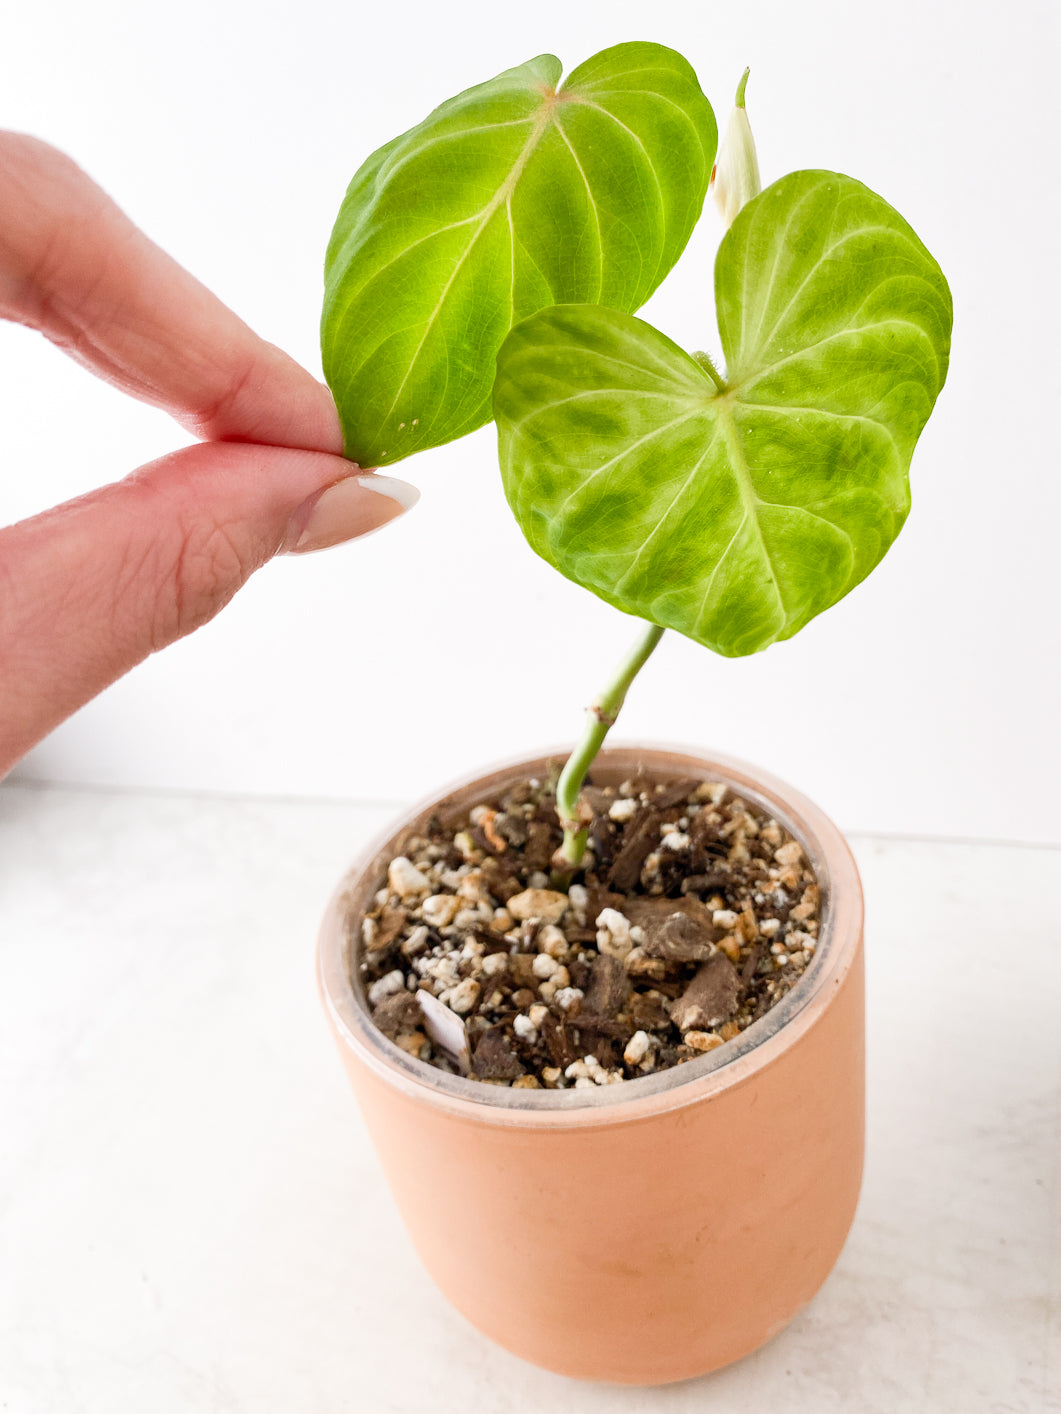 Combo Deal: Philodendron Verrucosum and Philodendron Gigas